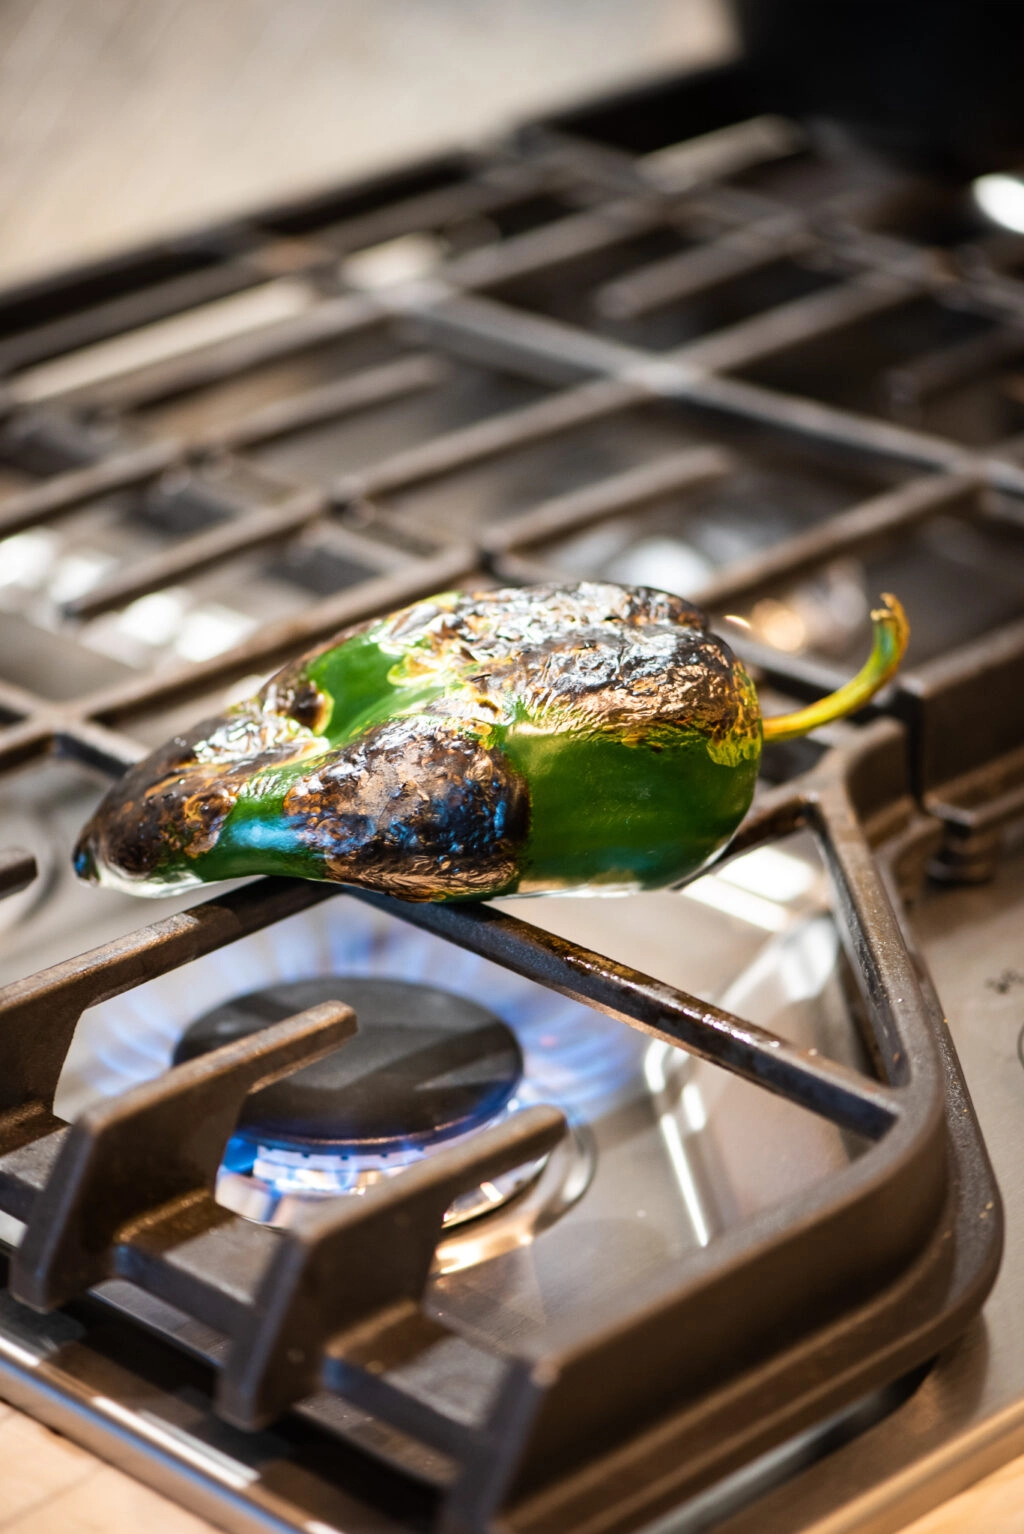 roasting poblano pepper on a open flame